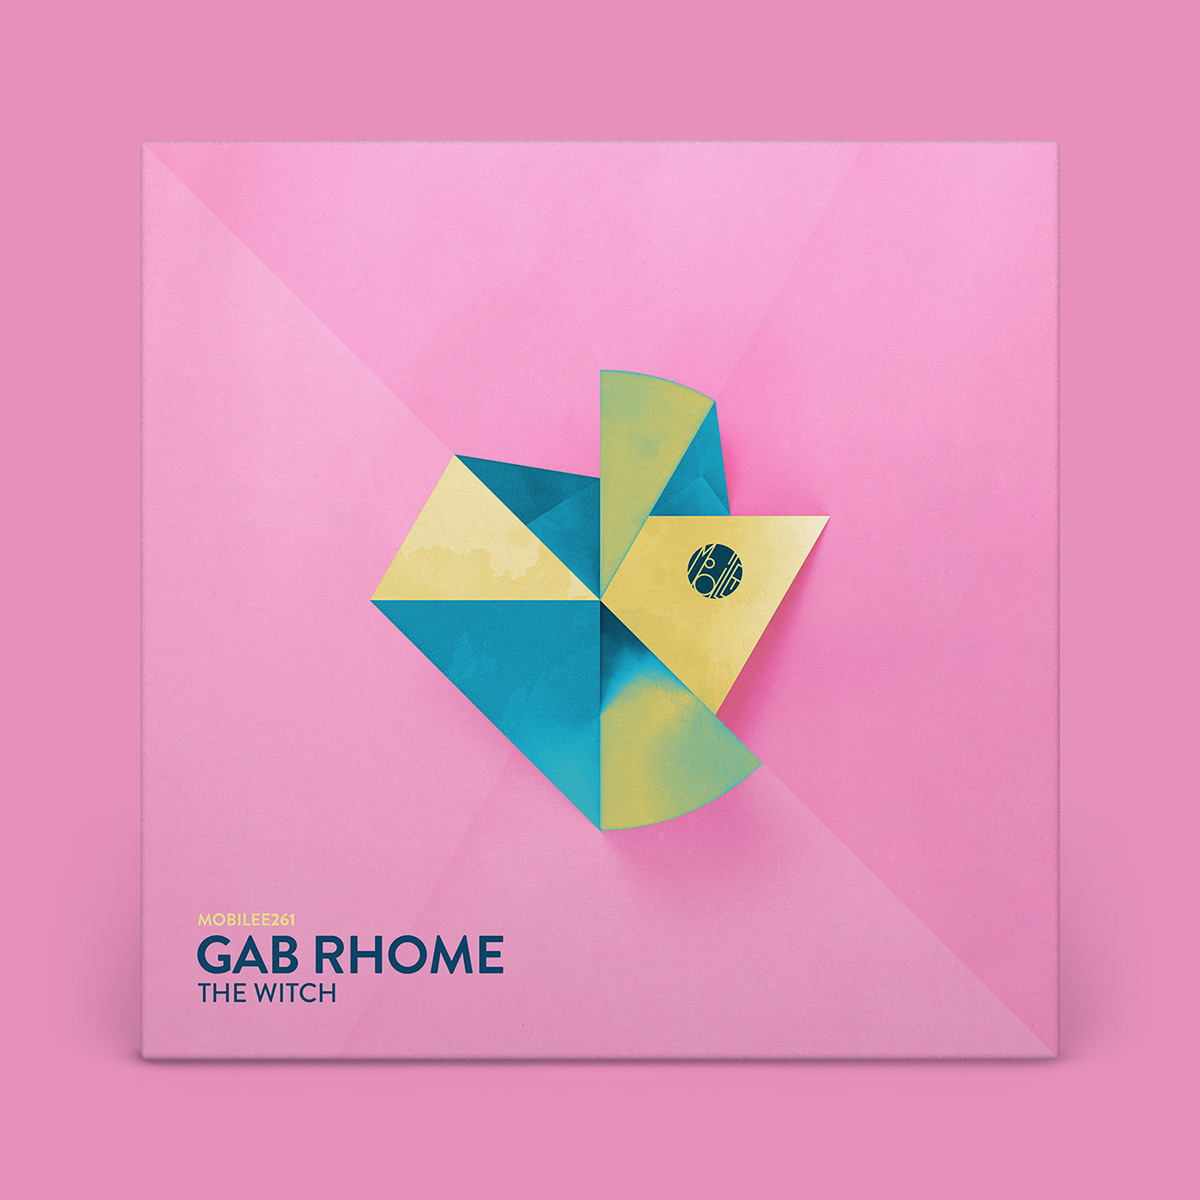 Mobilee261_GabRhome_TheWitch_mockup